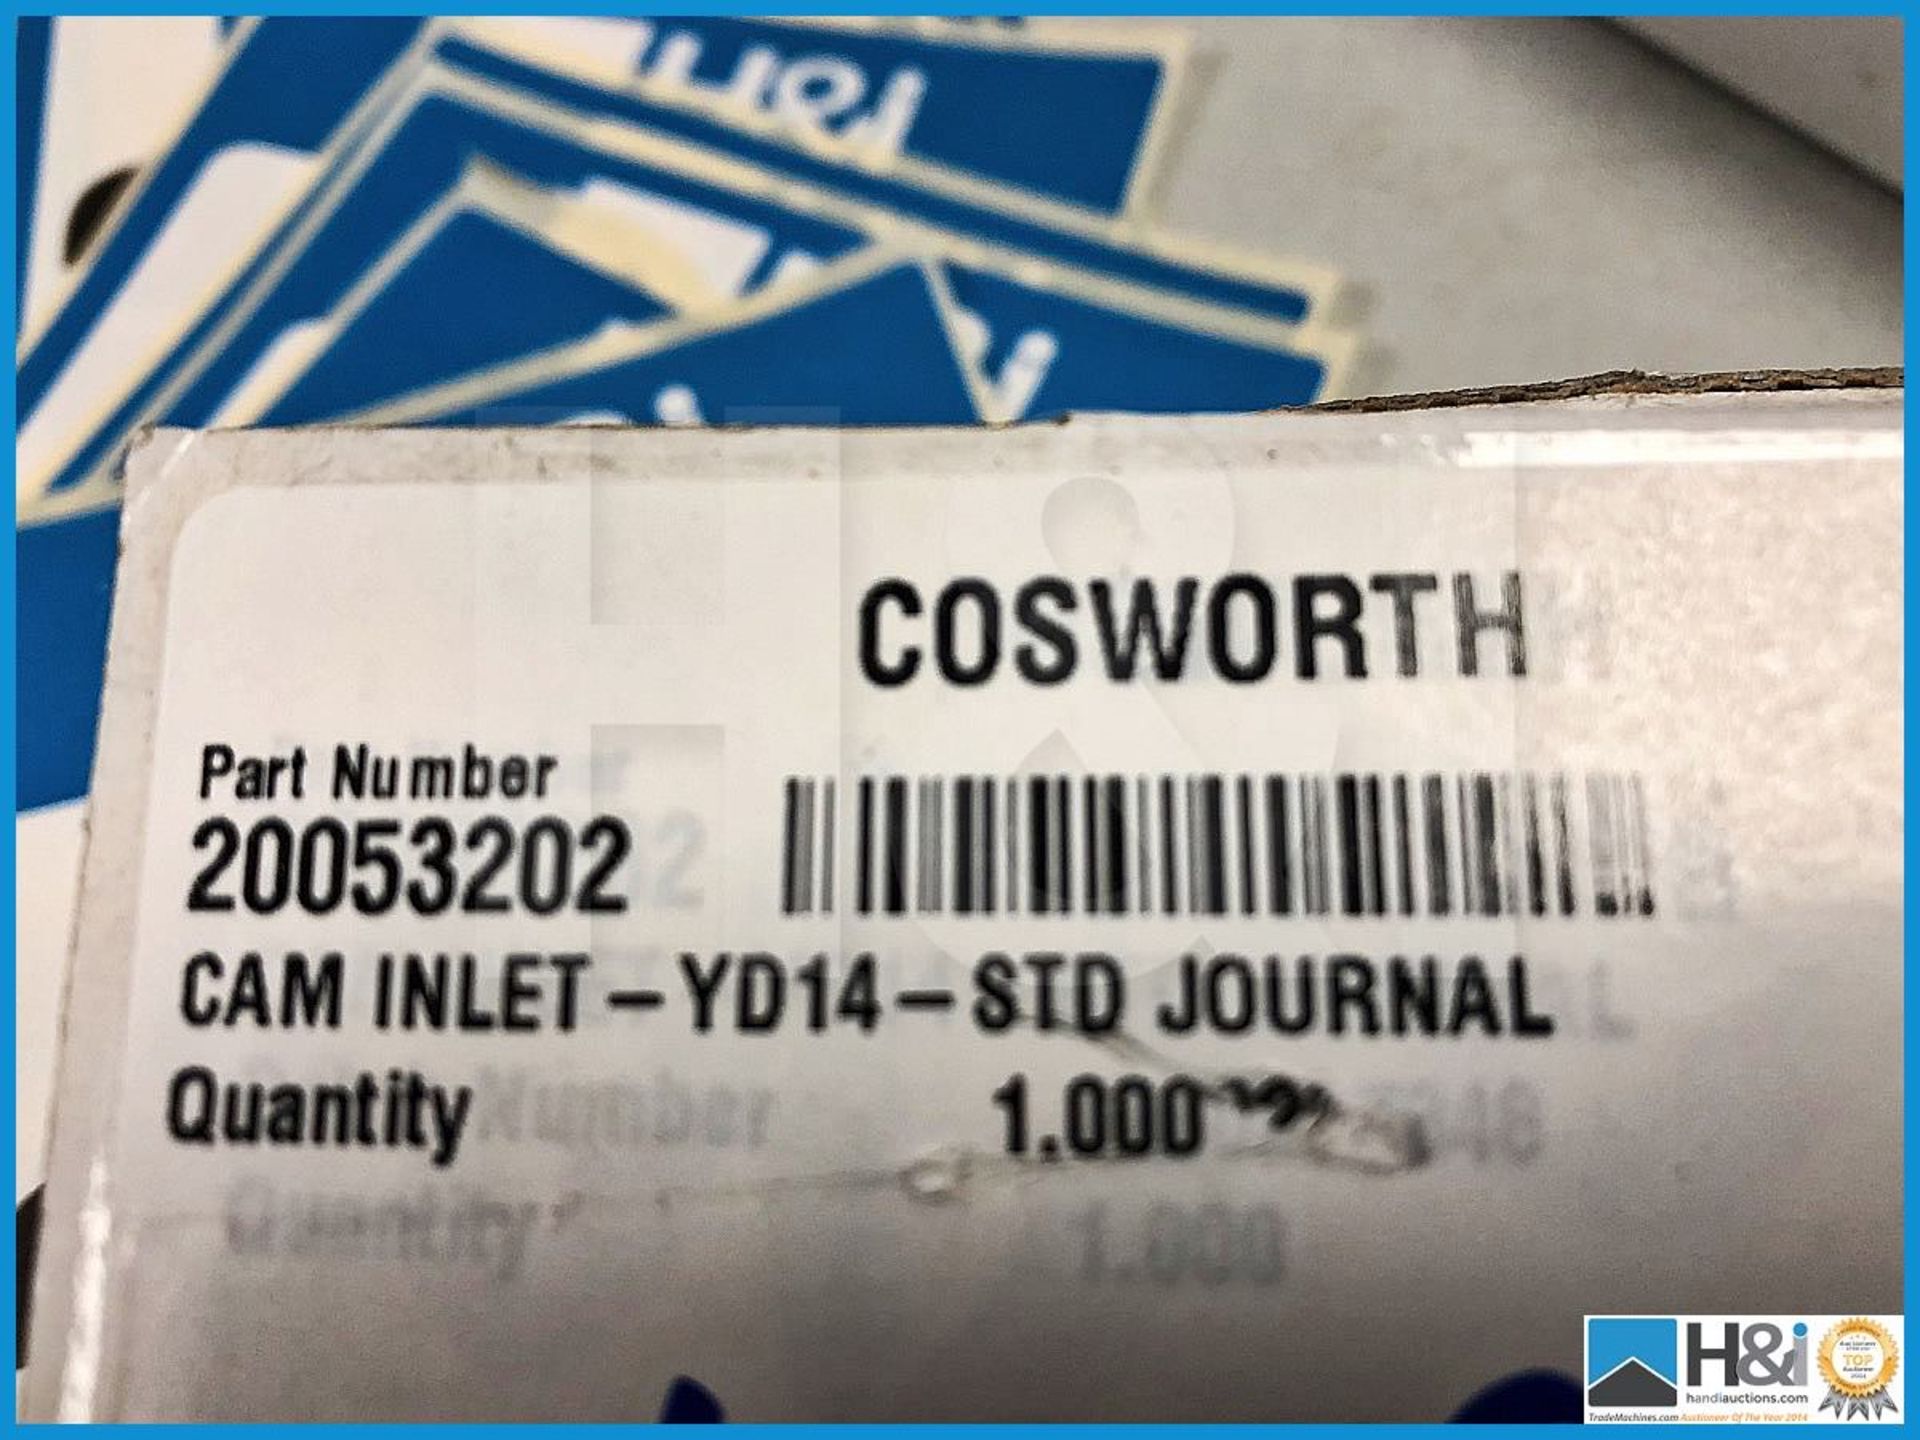 19 x Cosworth cam inlet YD14-STD journal. Code: 20053202. Lot 181. RRP GBP 3,100 - Image 3 of 3